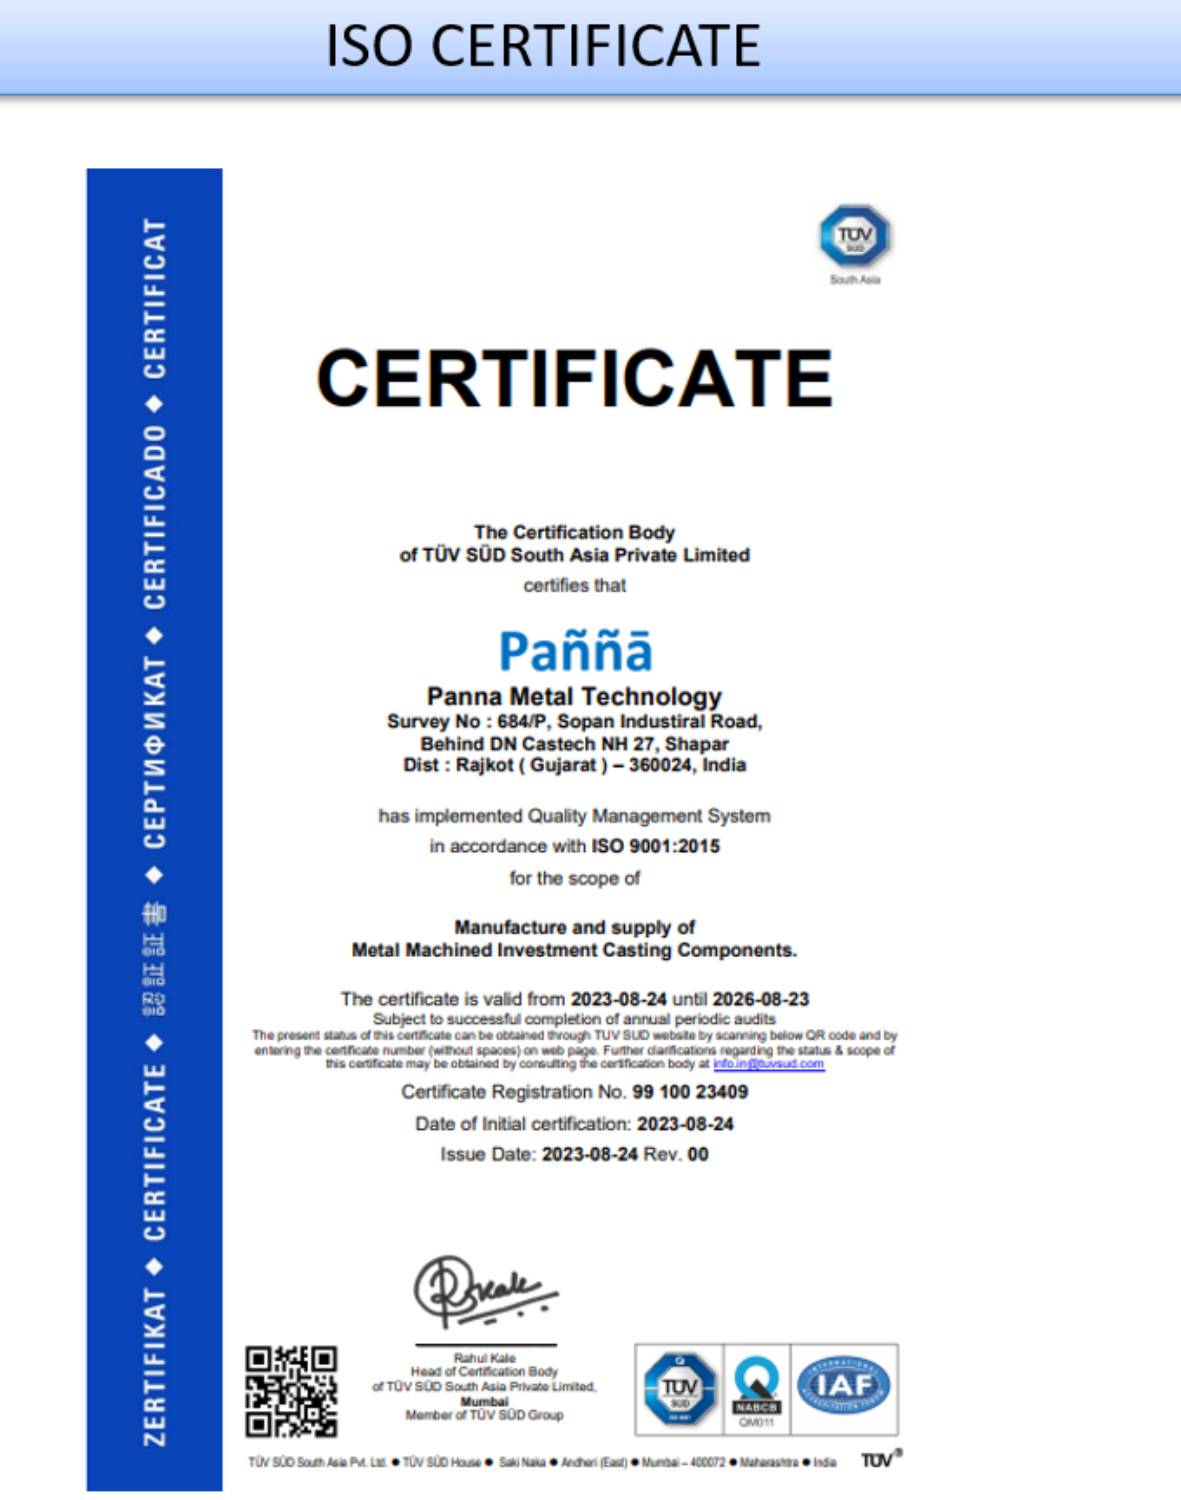 Panna Metal Technology - ISO Certificate